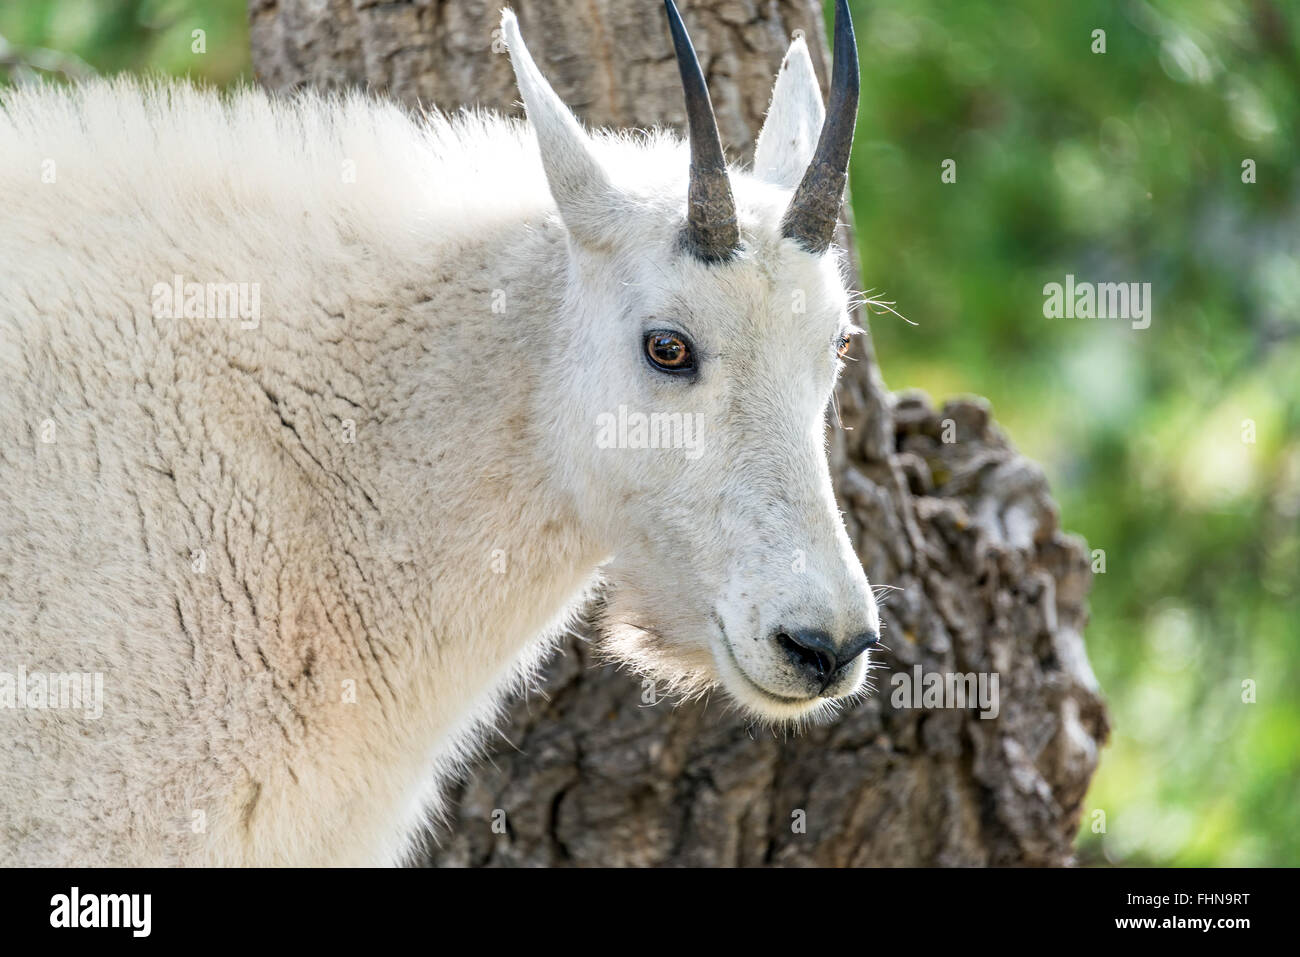 Closeup of the face of a rocky mountain goat in Custer State Park in South Dakota Stock Photo